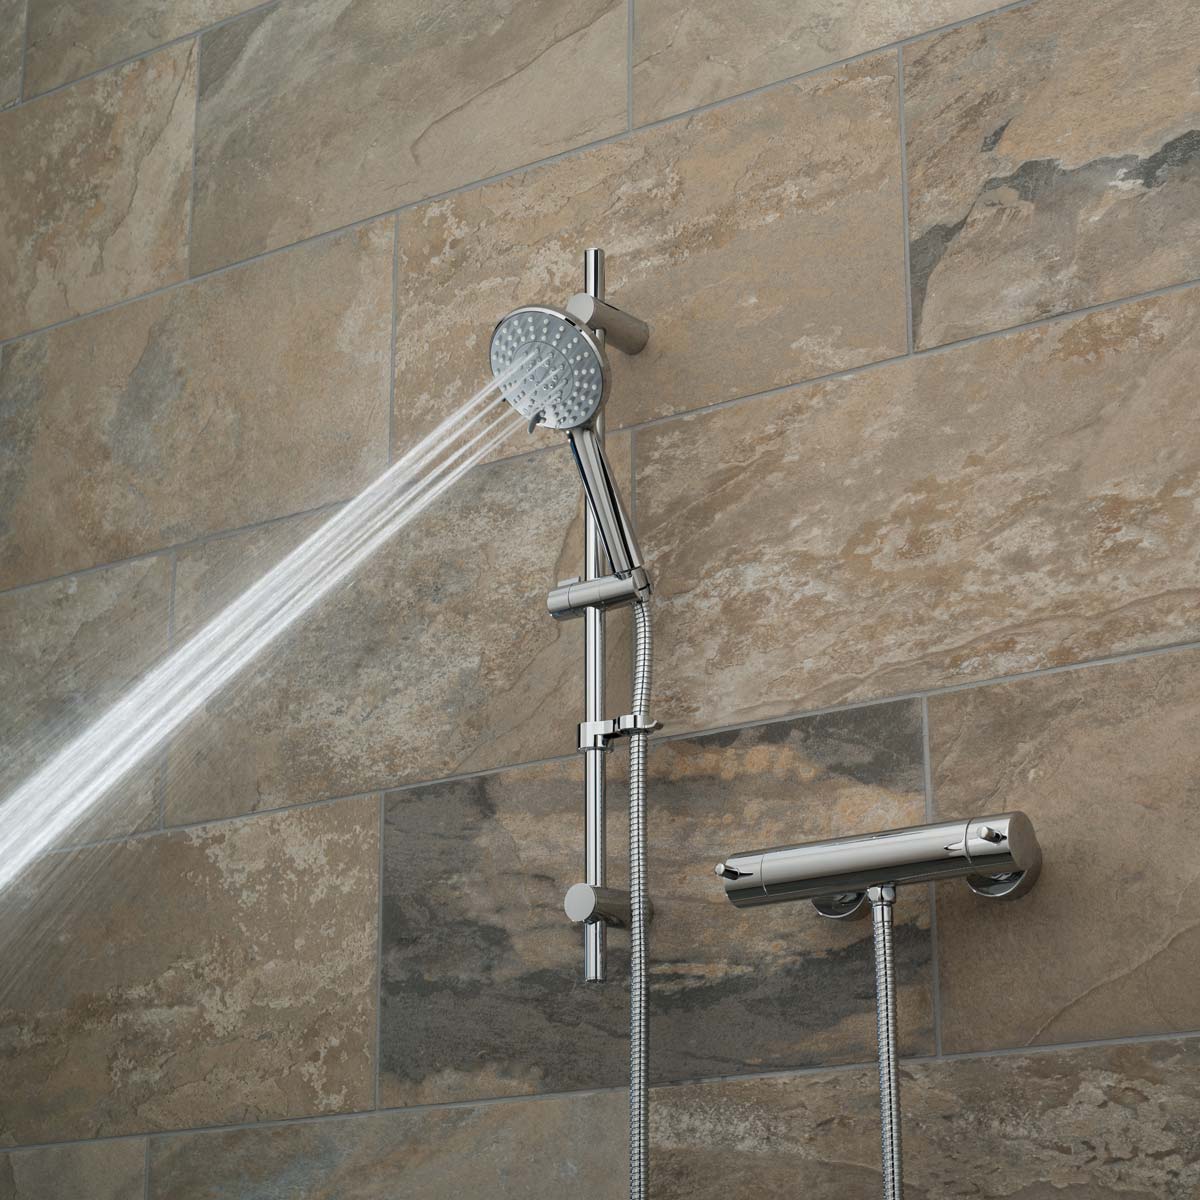 A slide rail shower kit with an exposed thermostatic bar type valve on a brown tiled wall with a narrow spray pattern